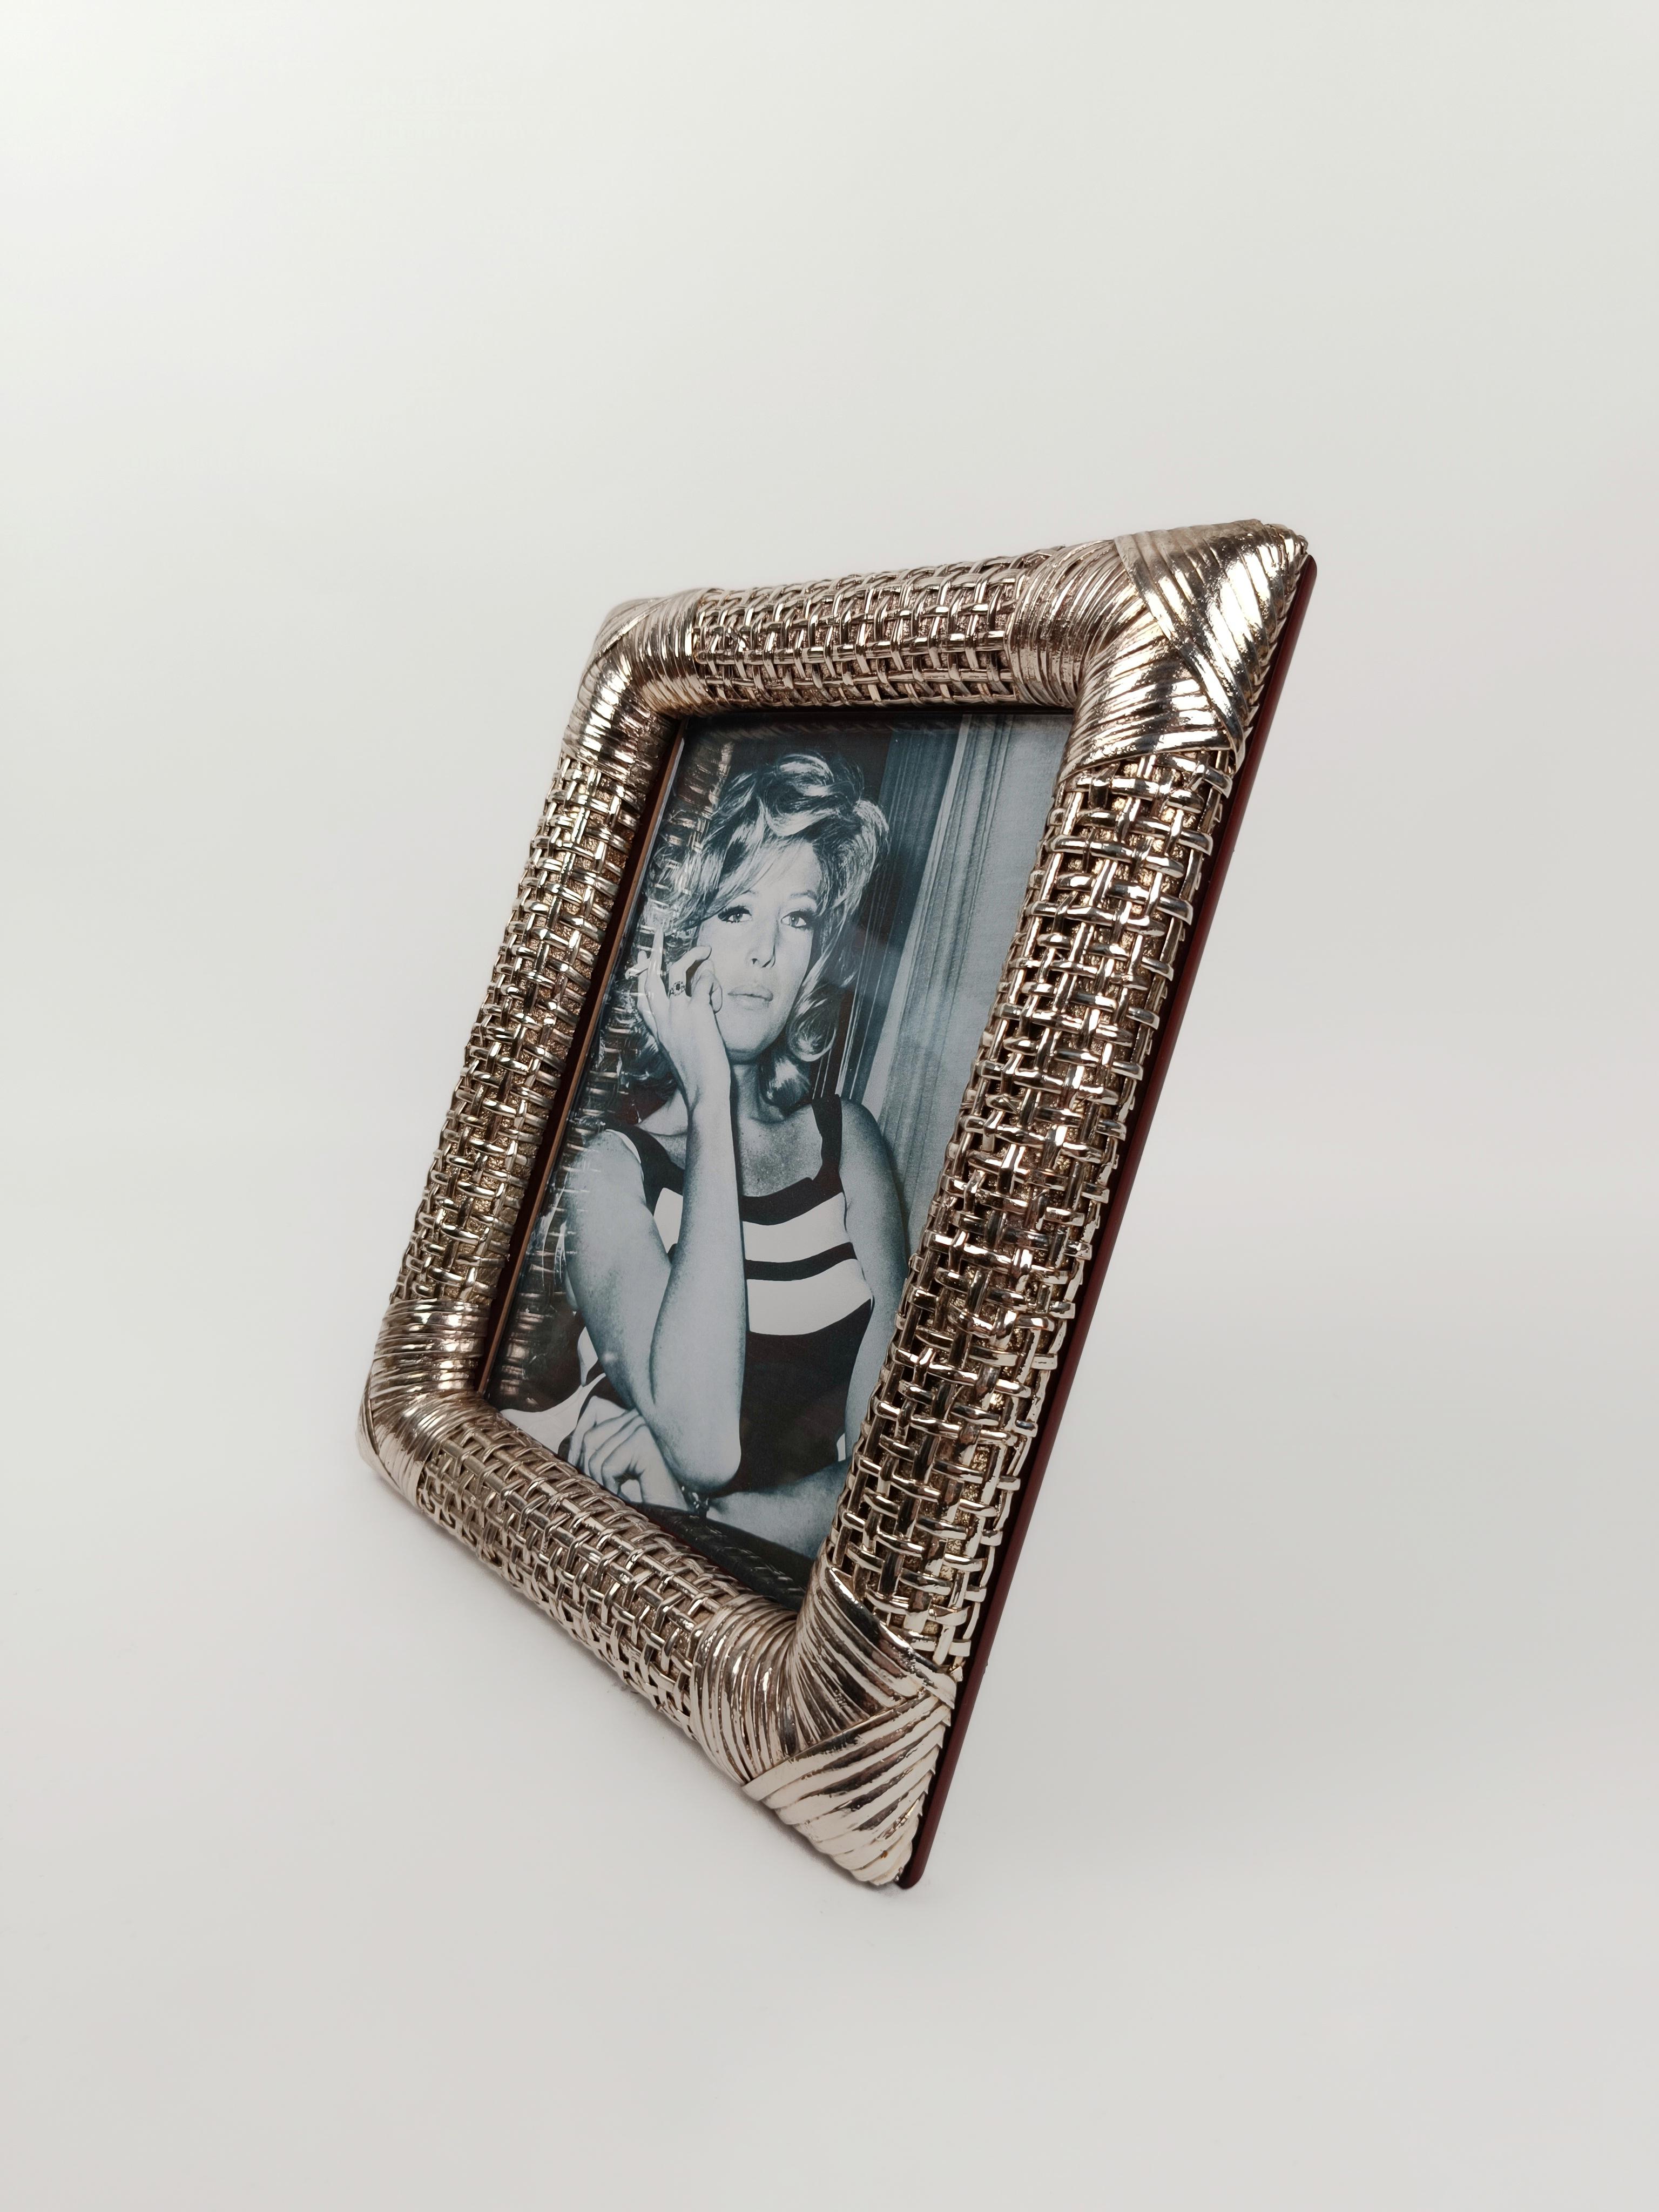 Midcentury Table Picture Frame Made in Silver Plated Woven Wicker, Italy 1970s For Sale 1